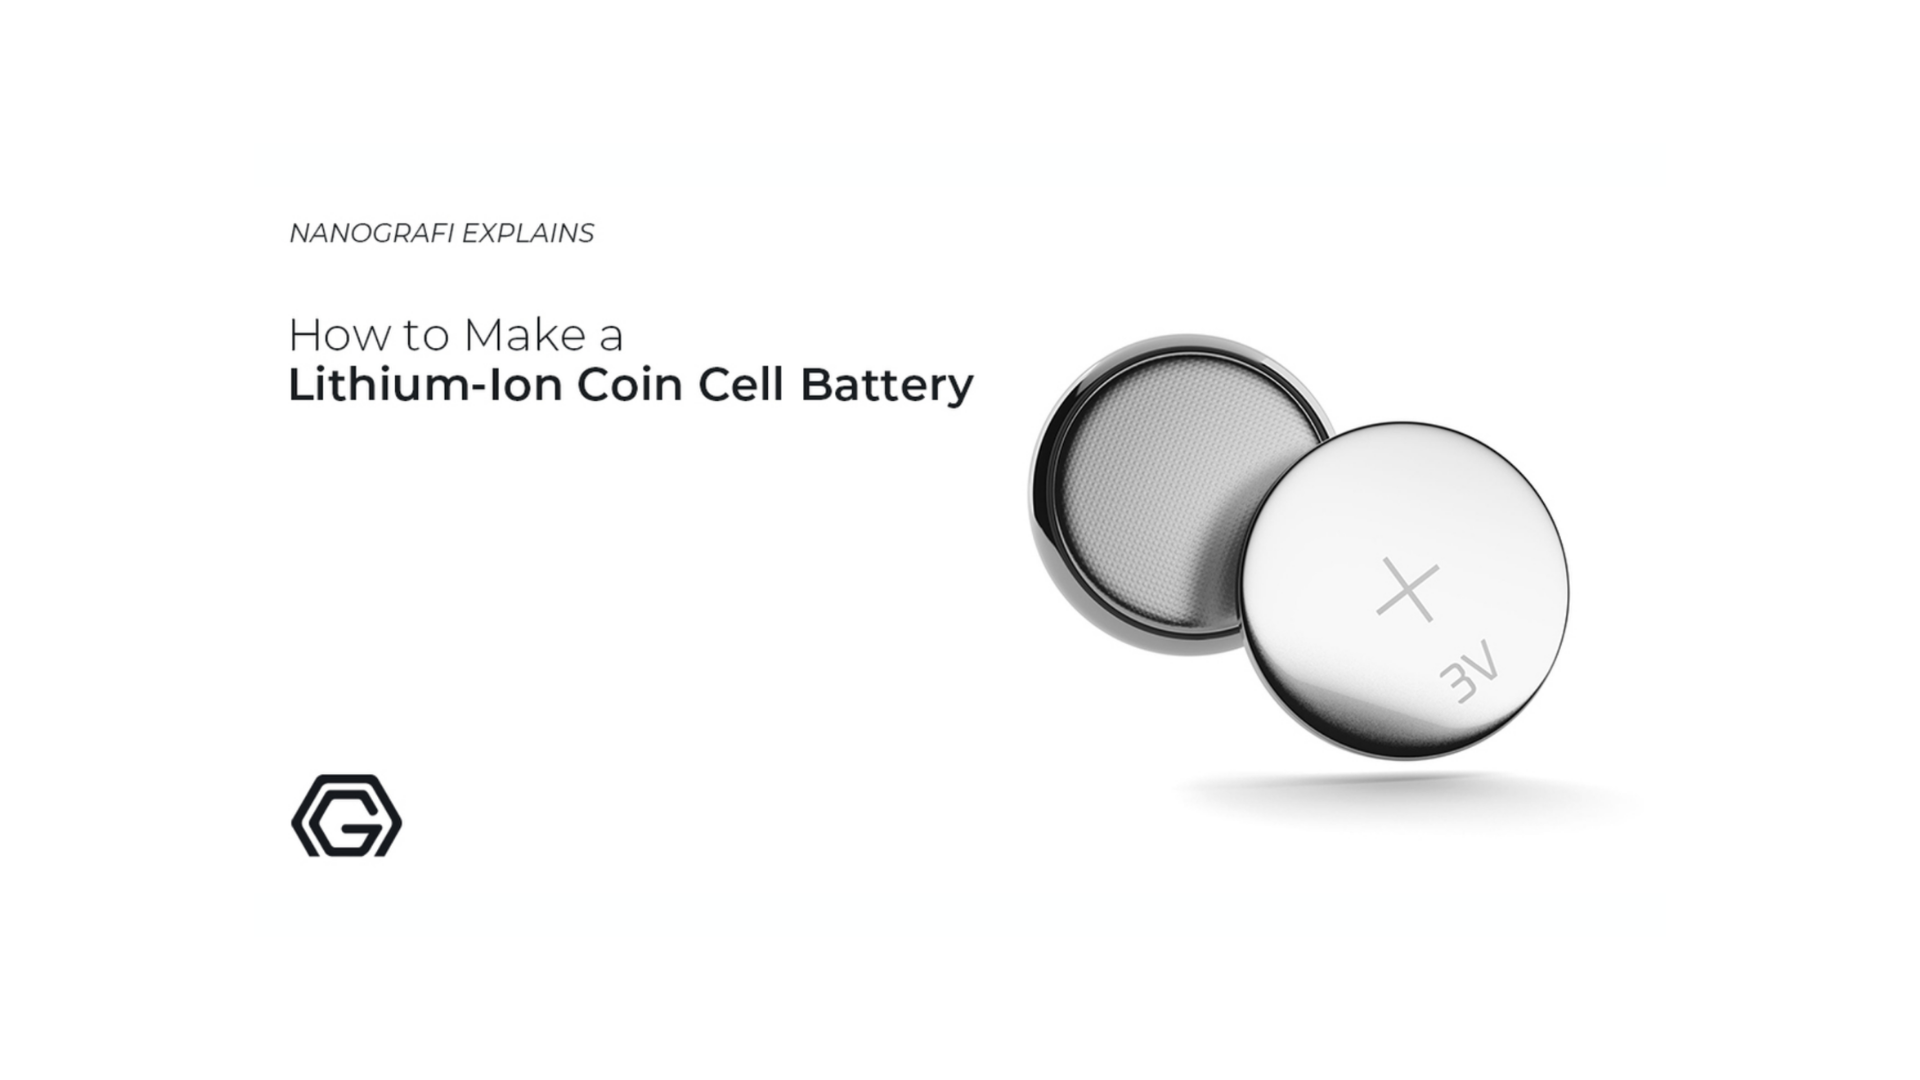 How to make a lithium-ion coin cell battery